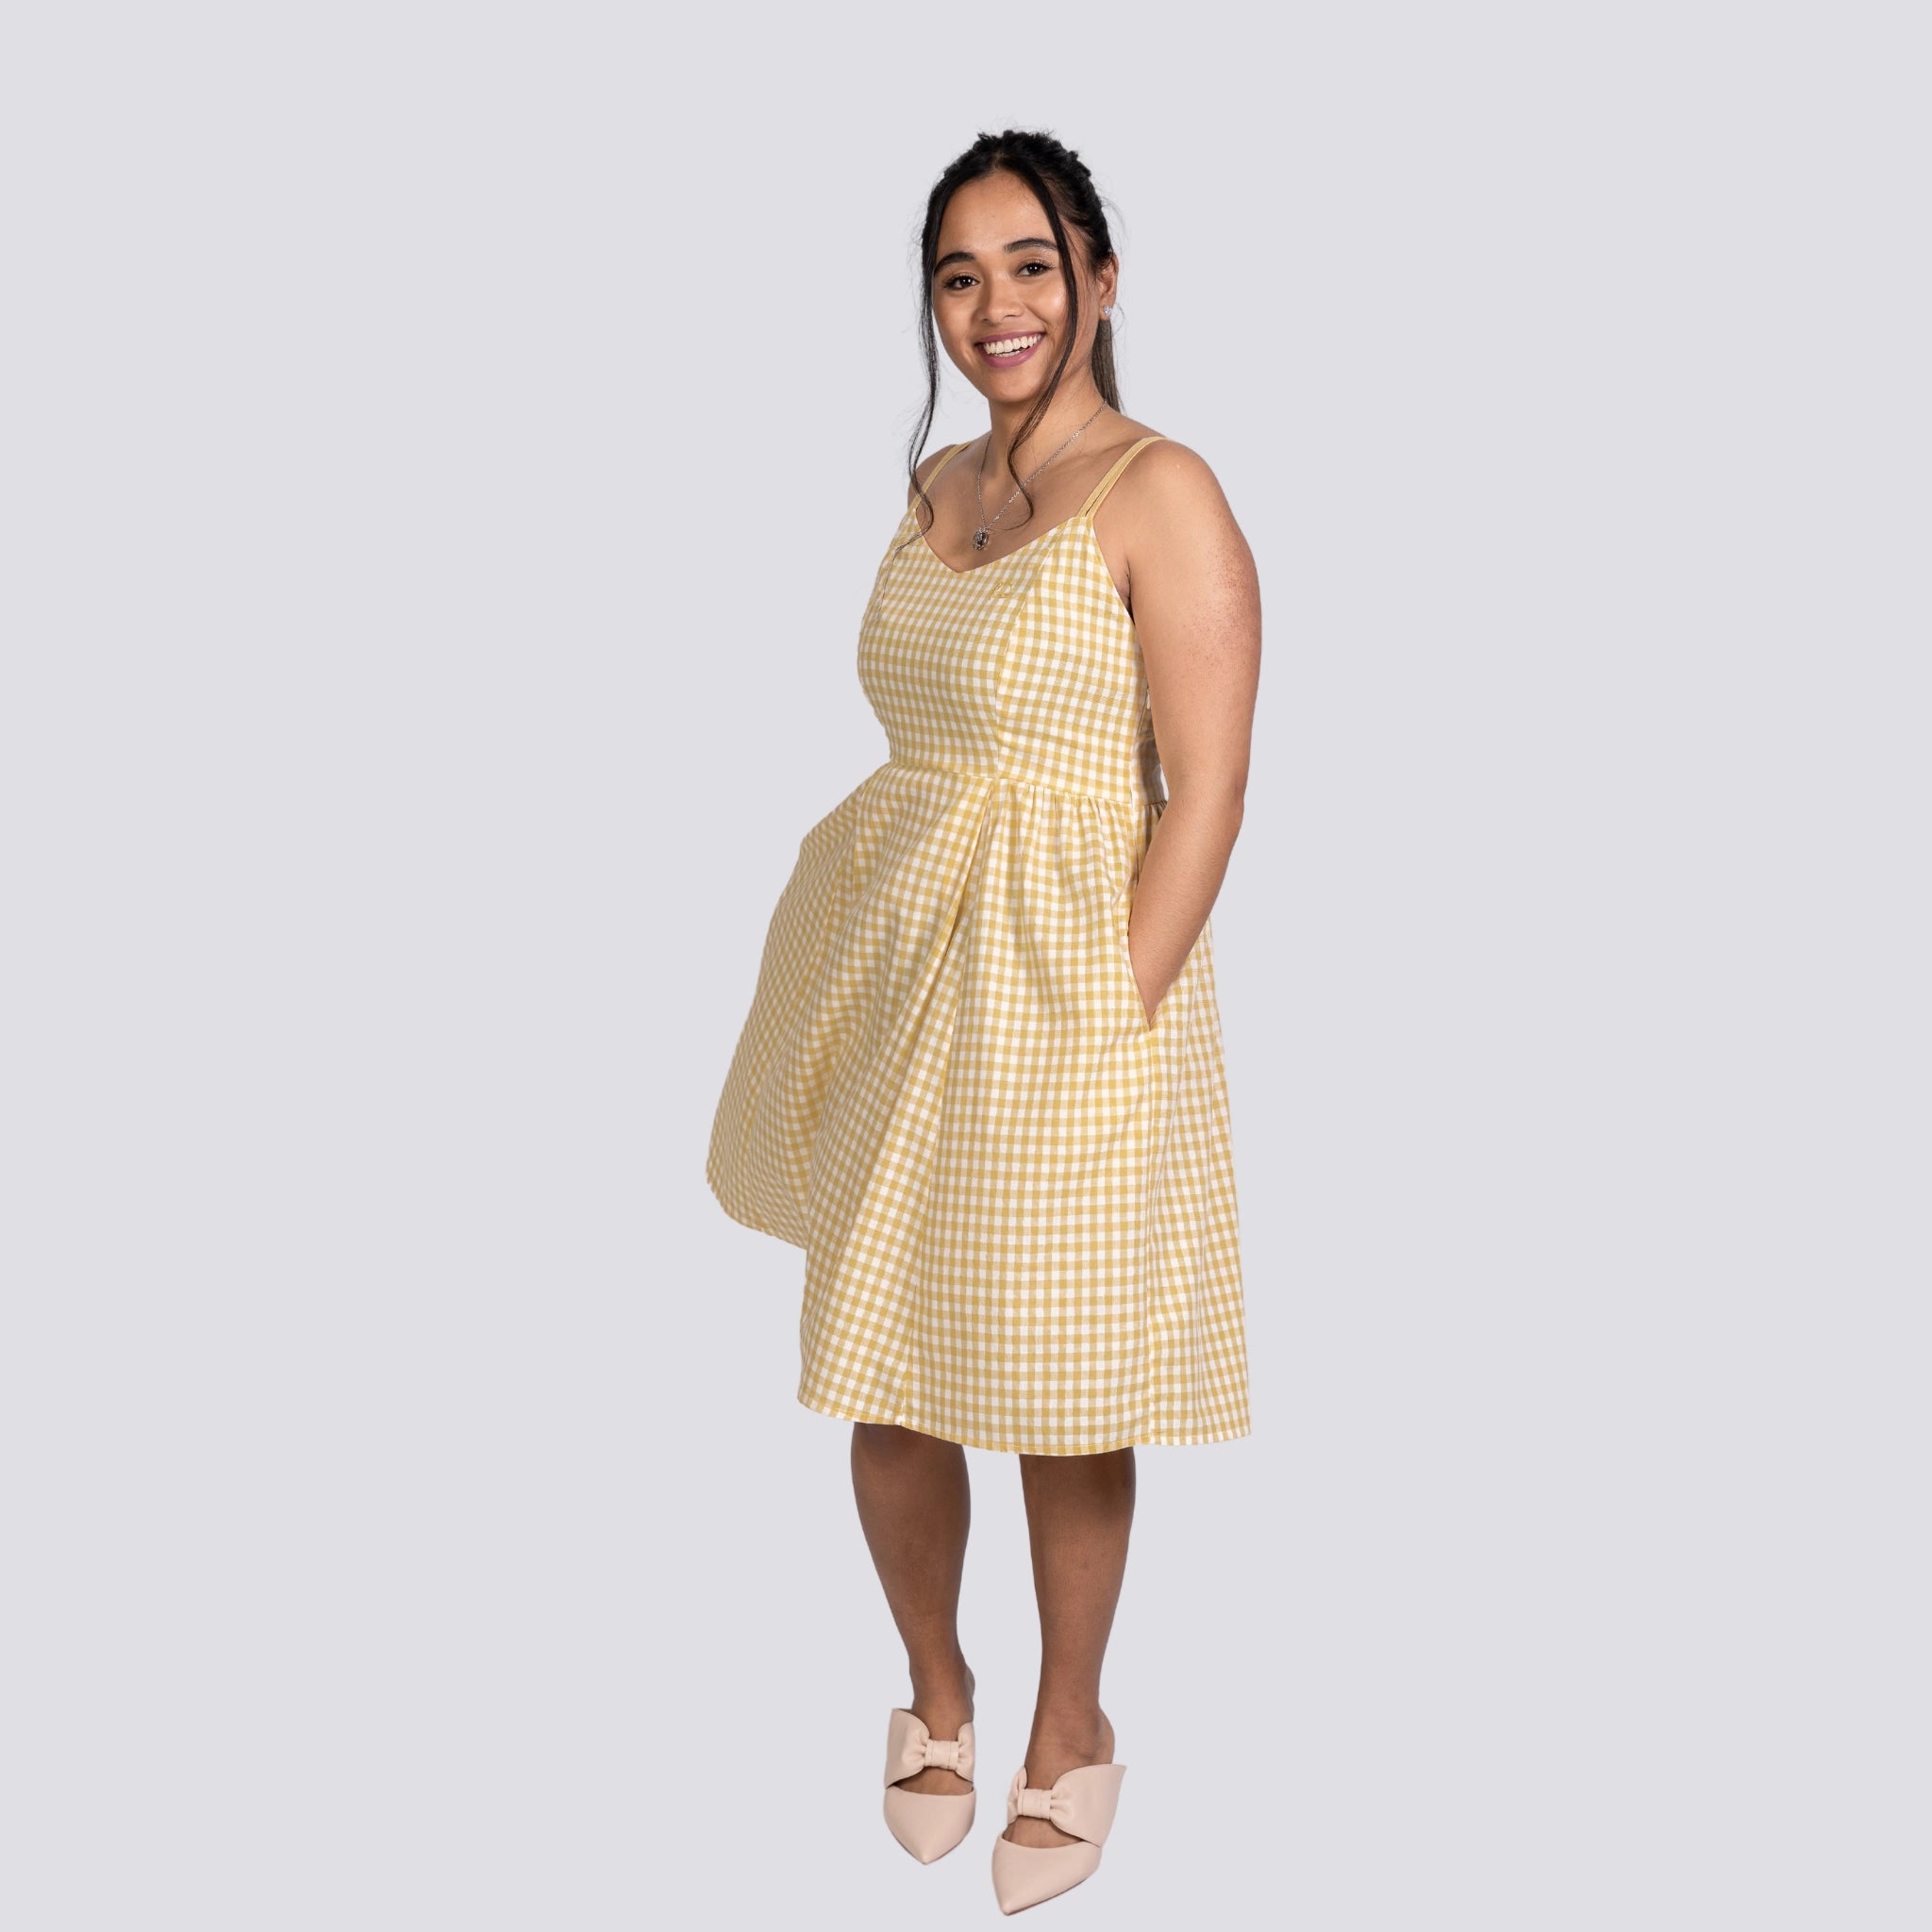 A smiling woman in a Sunshine Chic Yellow Plaid Cotton Mini Dress by Karee and white shoes standing against a gray background.